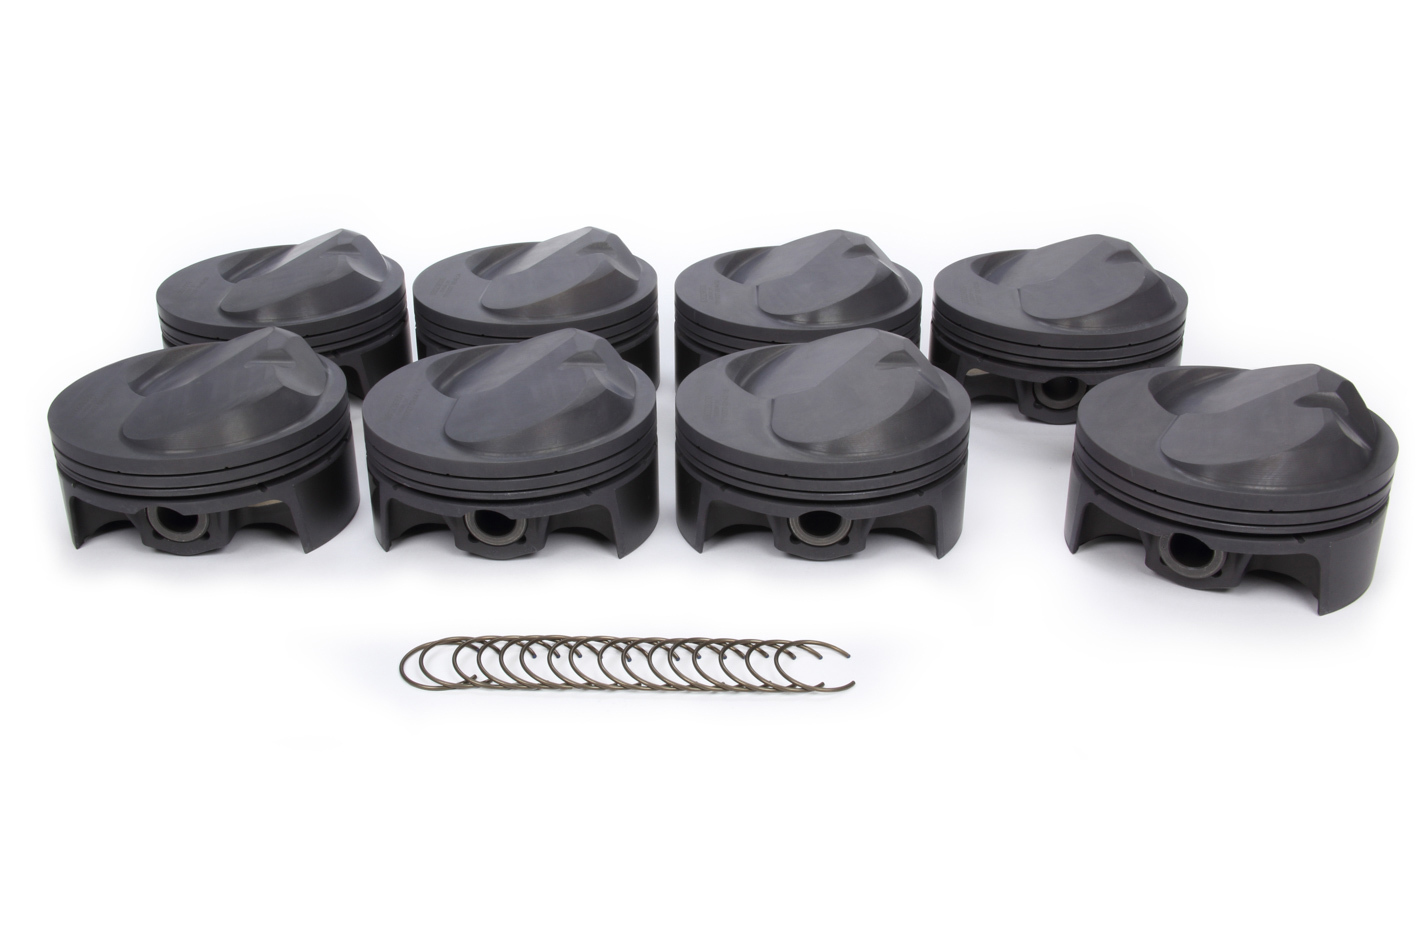 Mahle Pistons 930239310 Piston, Elite Sportsman, Forged, 4.610 in Bore, 0.043 x 0.043 x 3 mm Ring Grooves, Plus 47.10 cc, Big Block Chevy, Set of 8